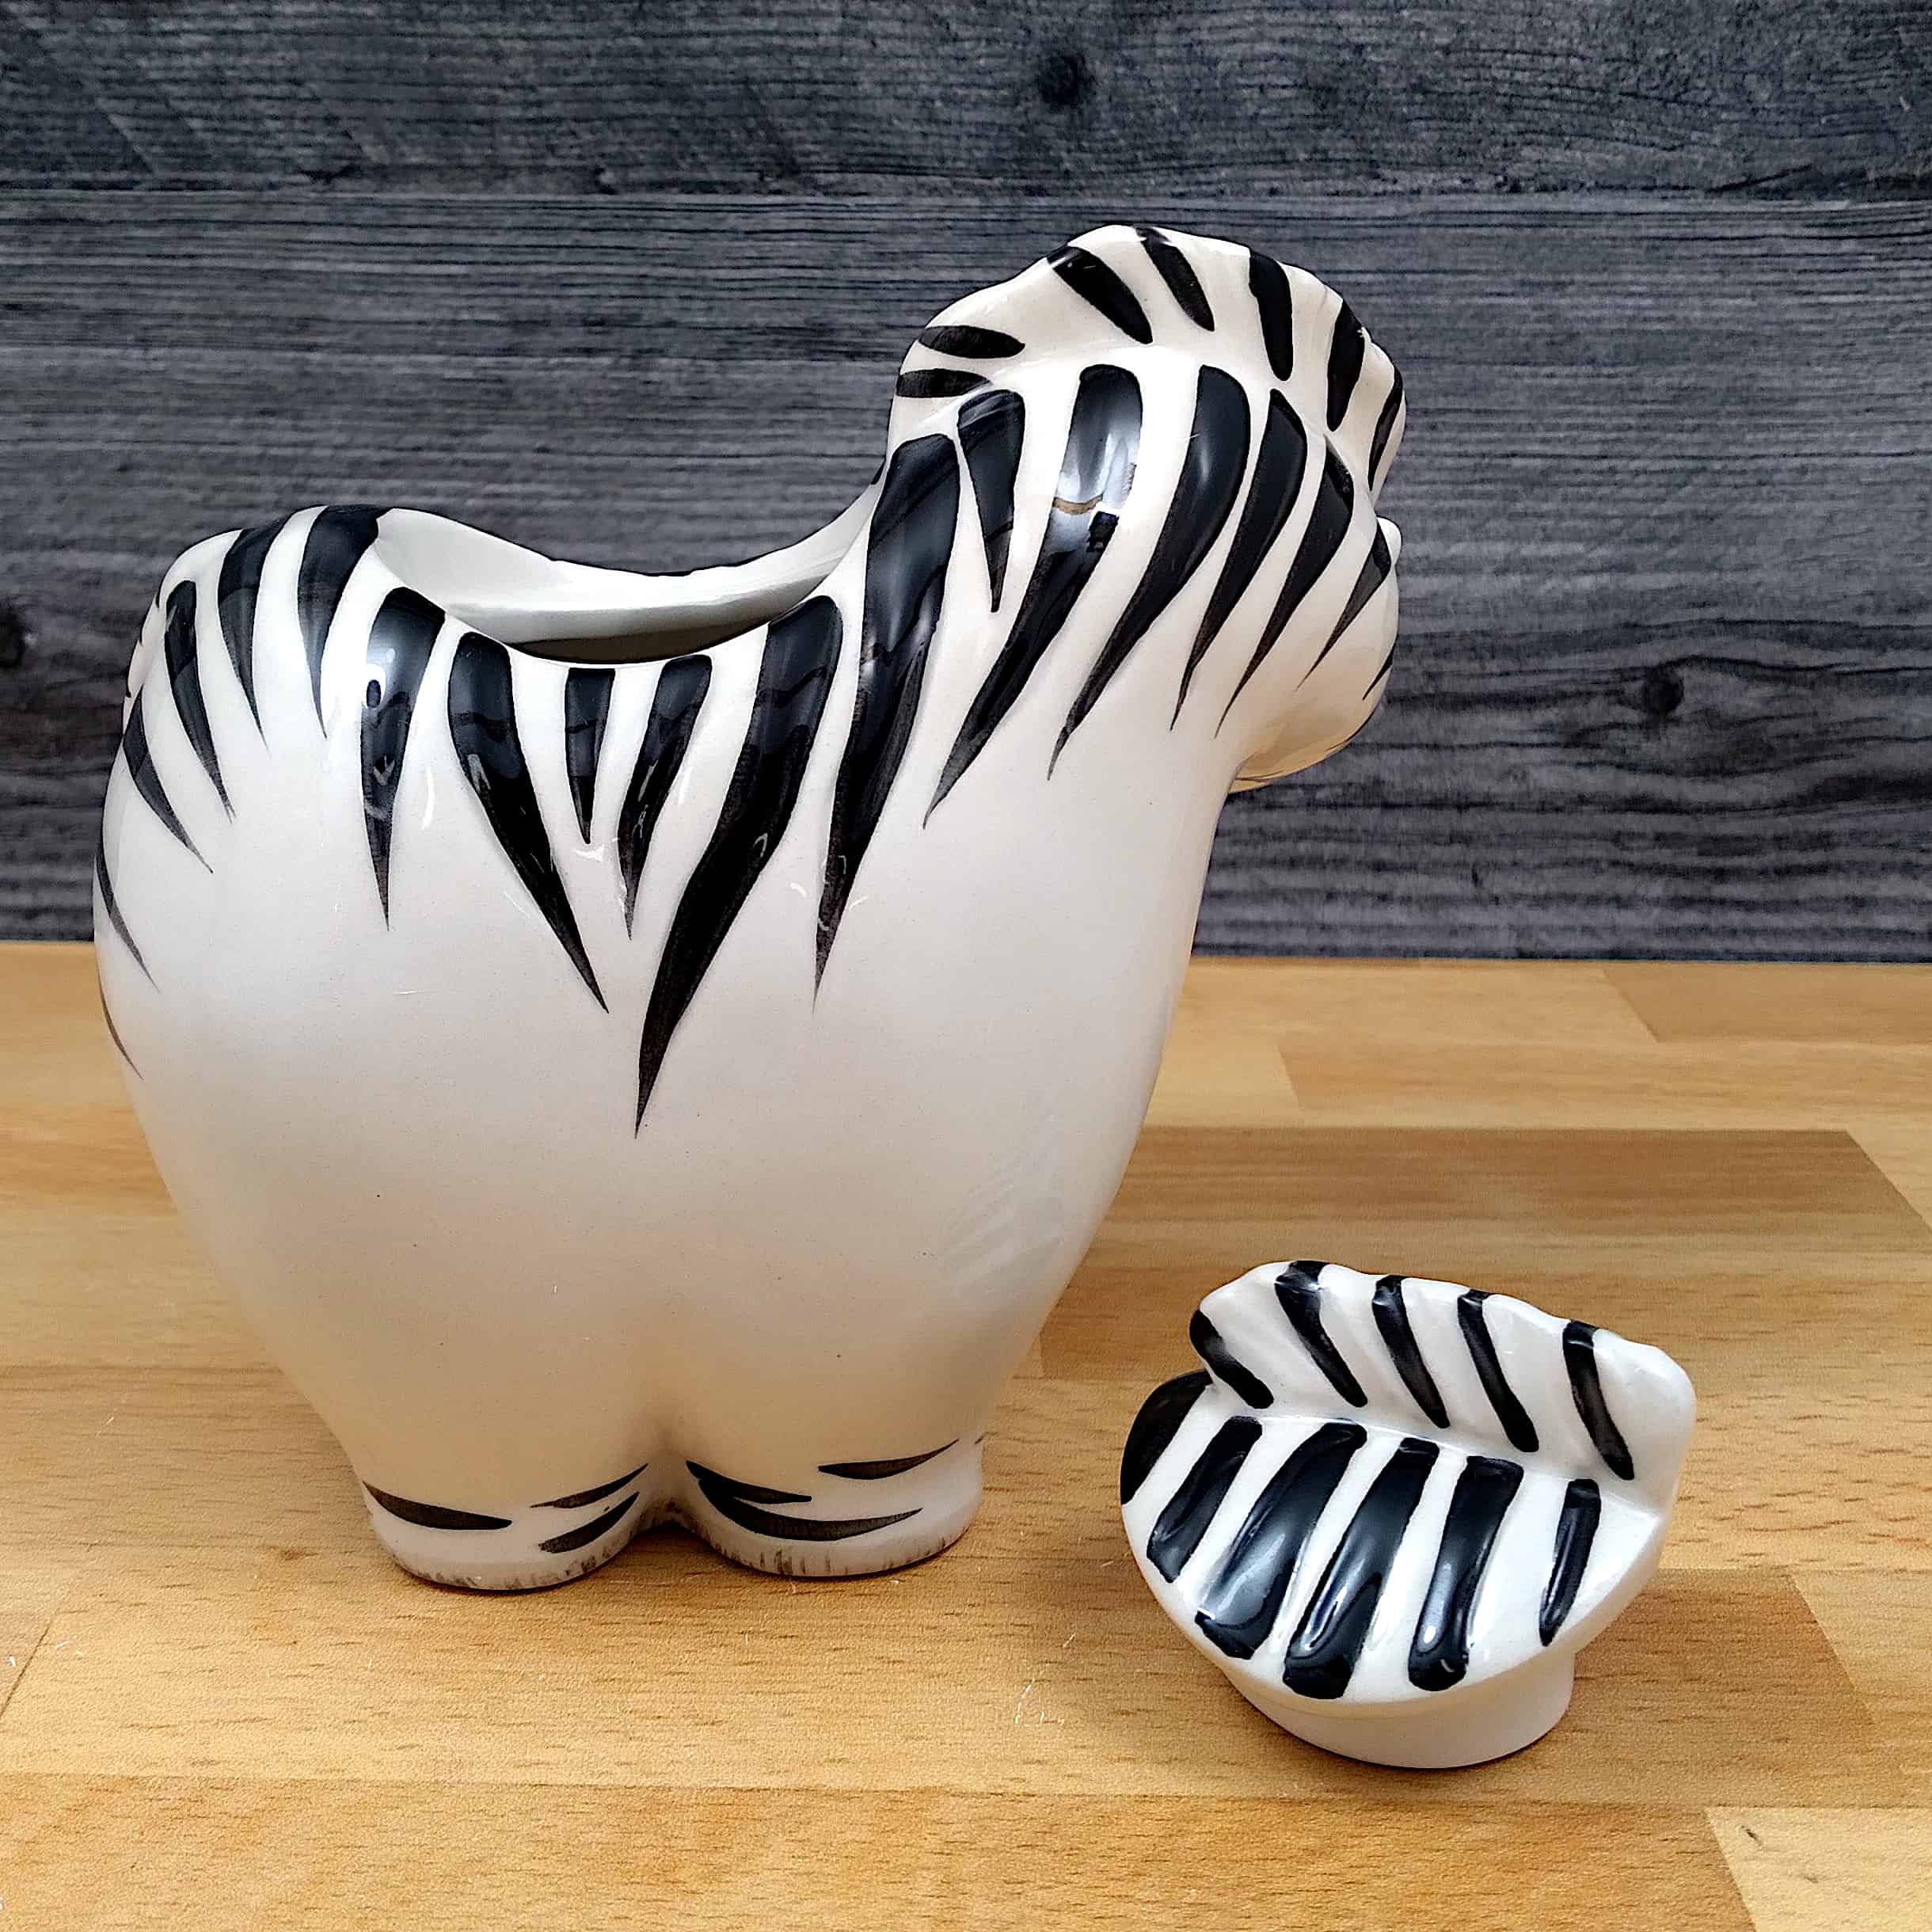 This Zebra Sugar Bowl and Creamer Set Decorative by Blue Sky is made with love by Premier Homegoods! Shop more unique gift ideas today with Spots Initiatives, the best way to support creators.